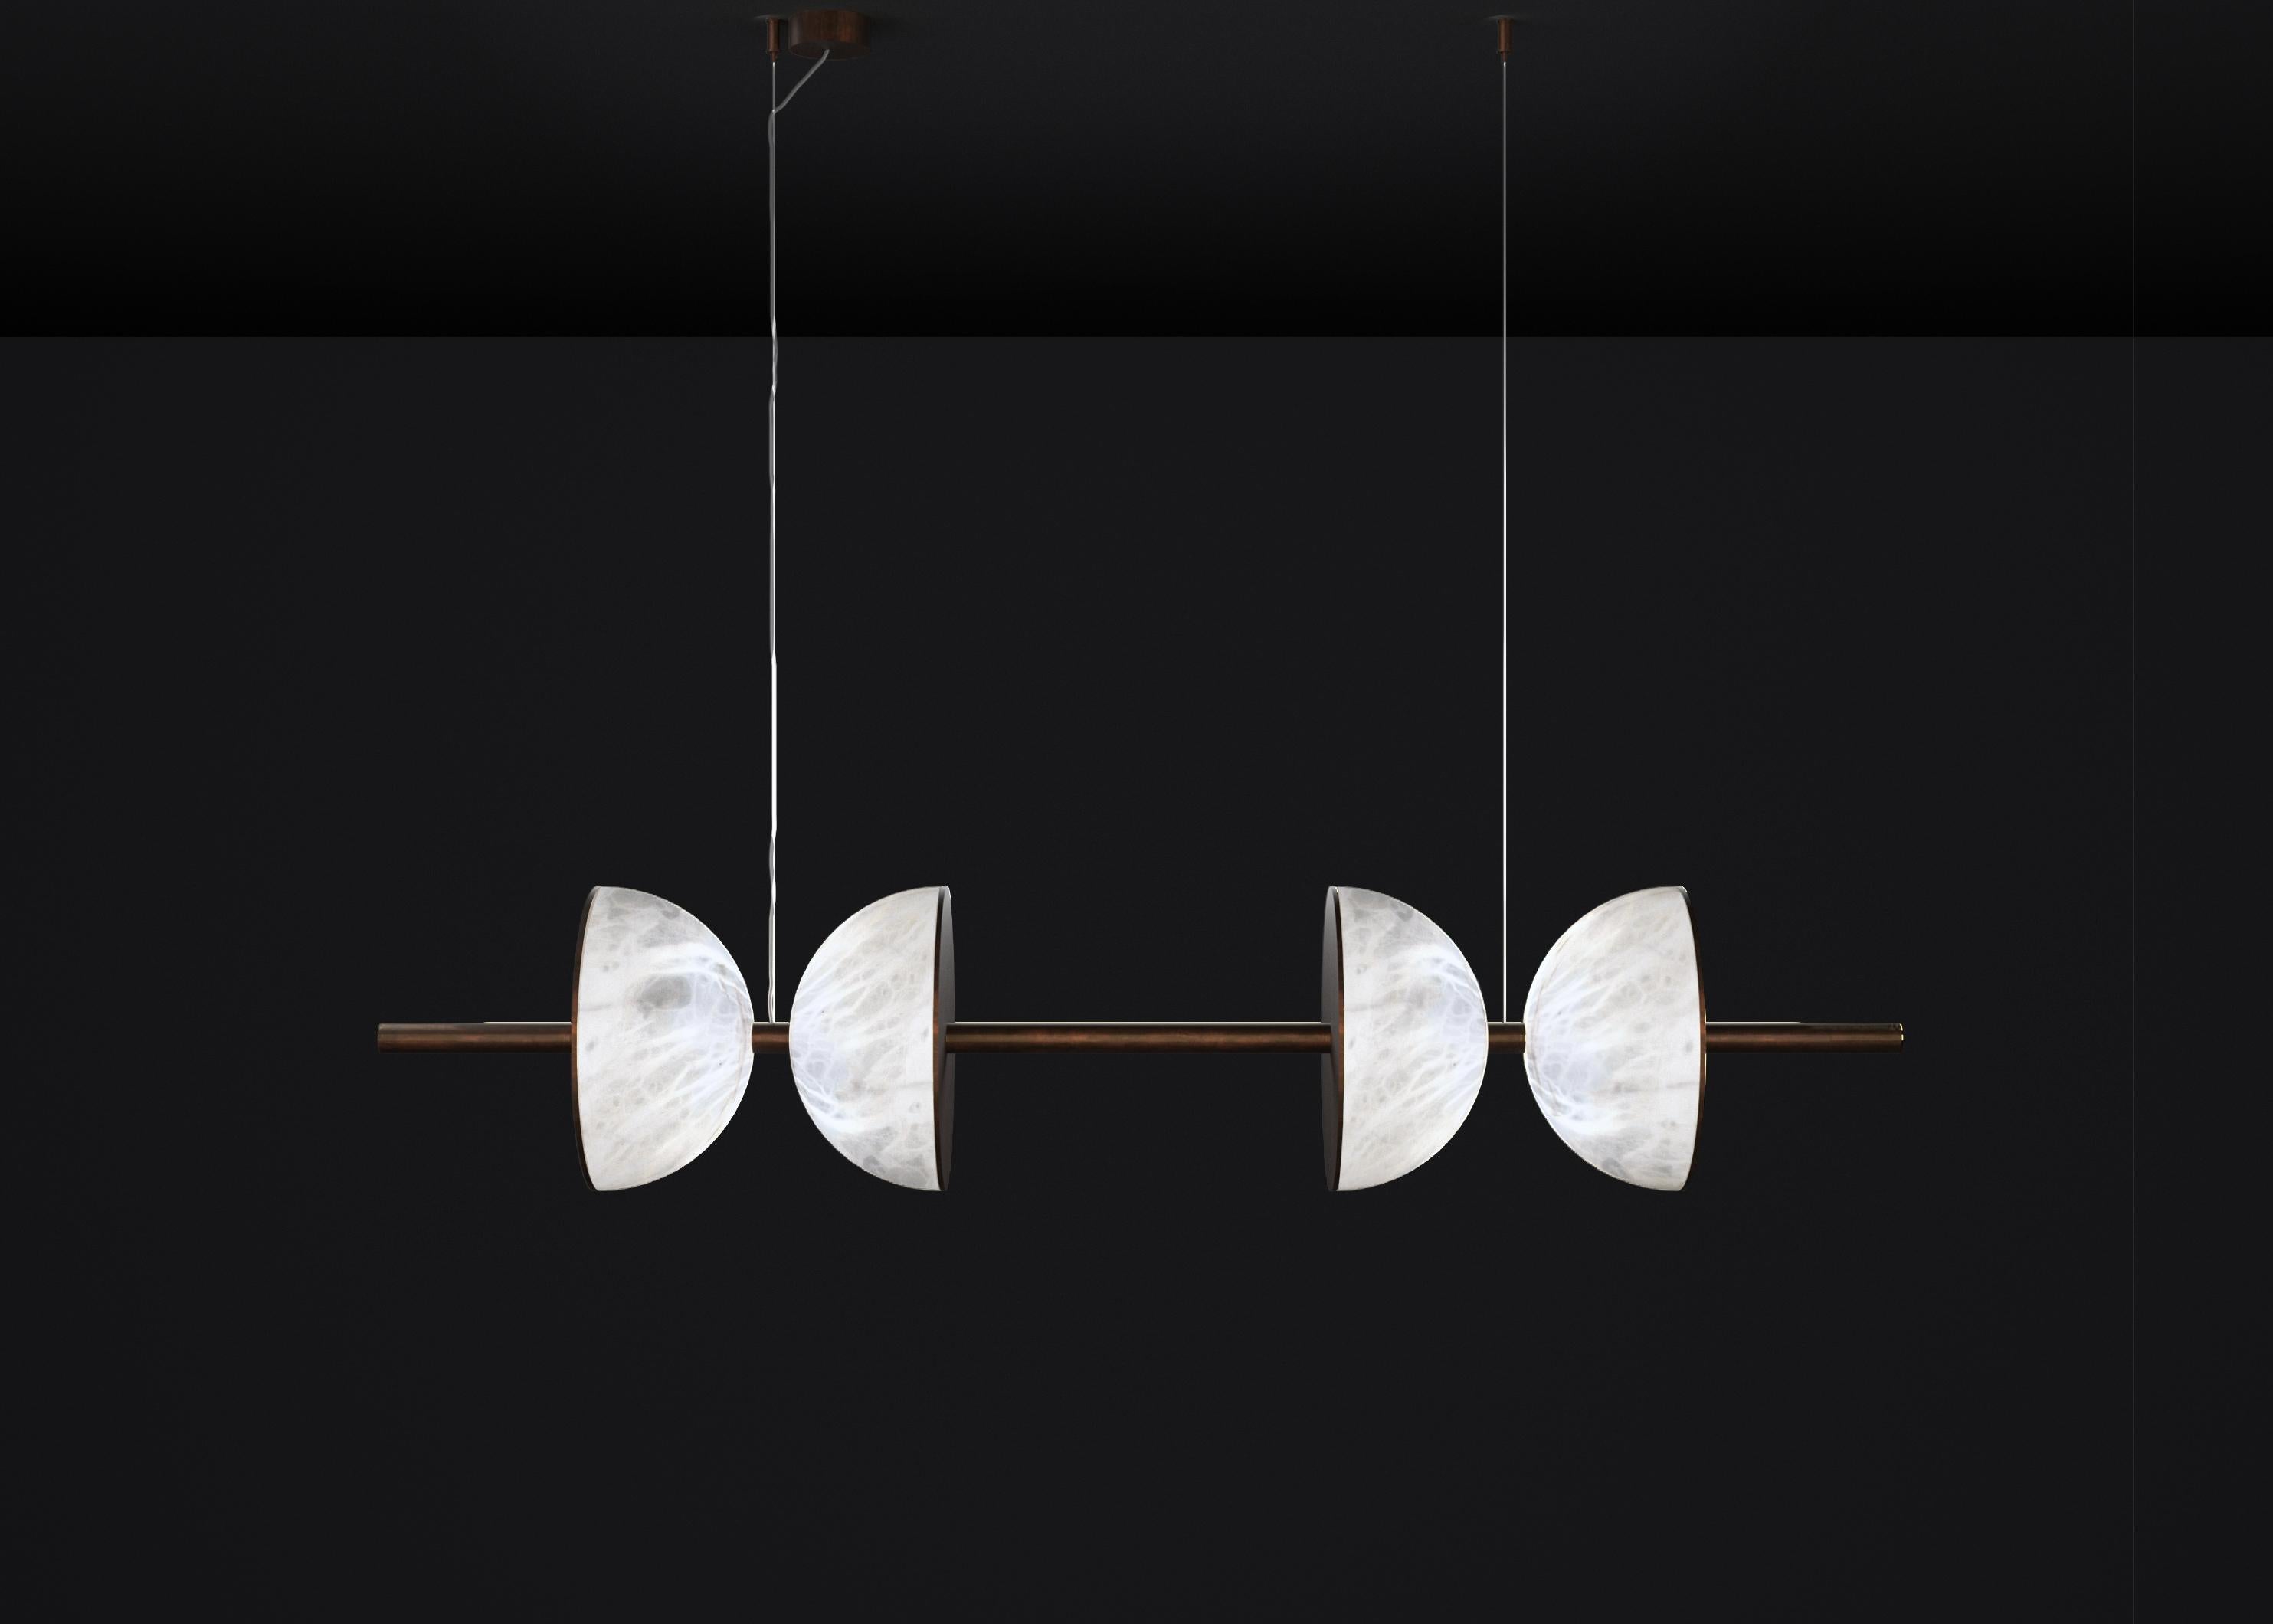 Ermes Ruggine Of Florence And Alabaster Pendant Light 2 by Alabastro Italiano
Dimensions: D 30 x W 150 x H 300 cm.
Materials: White alabaster and Ruggine of Florence metal.

Available in different finishes: Shiny Silver, Bronze, Brushed Brass,